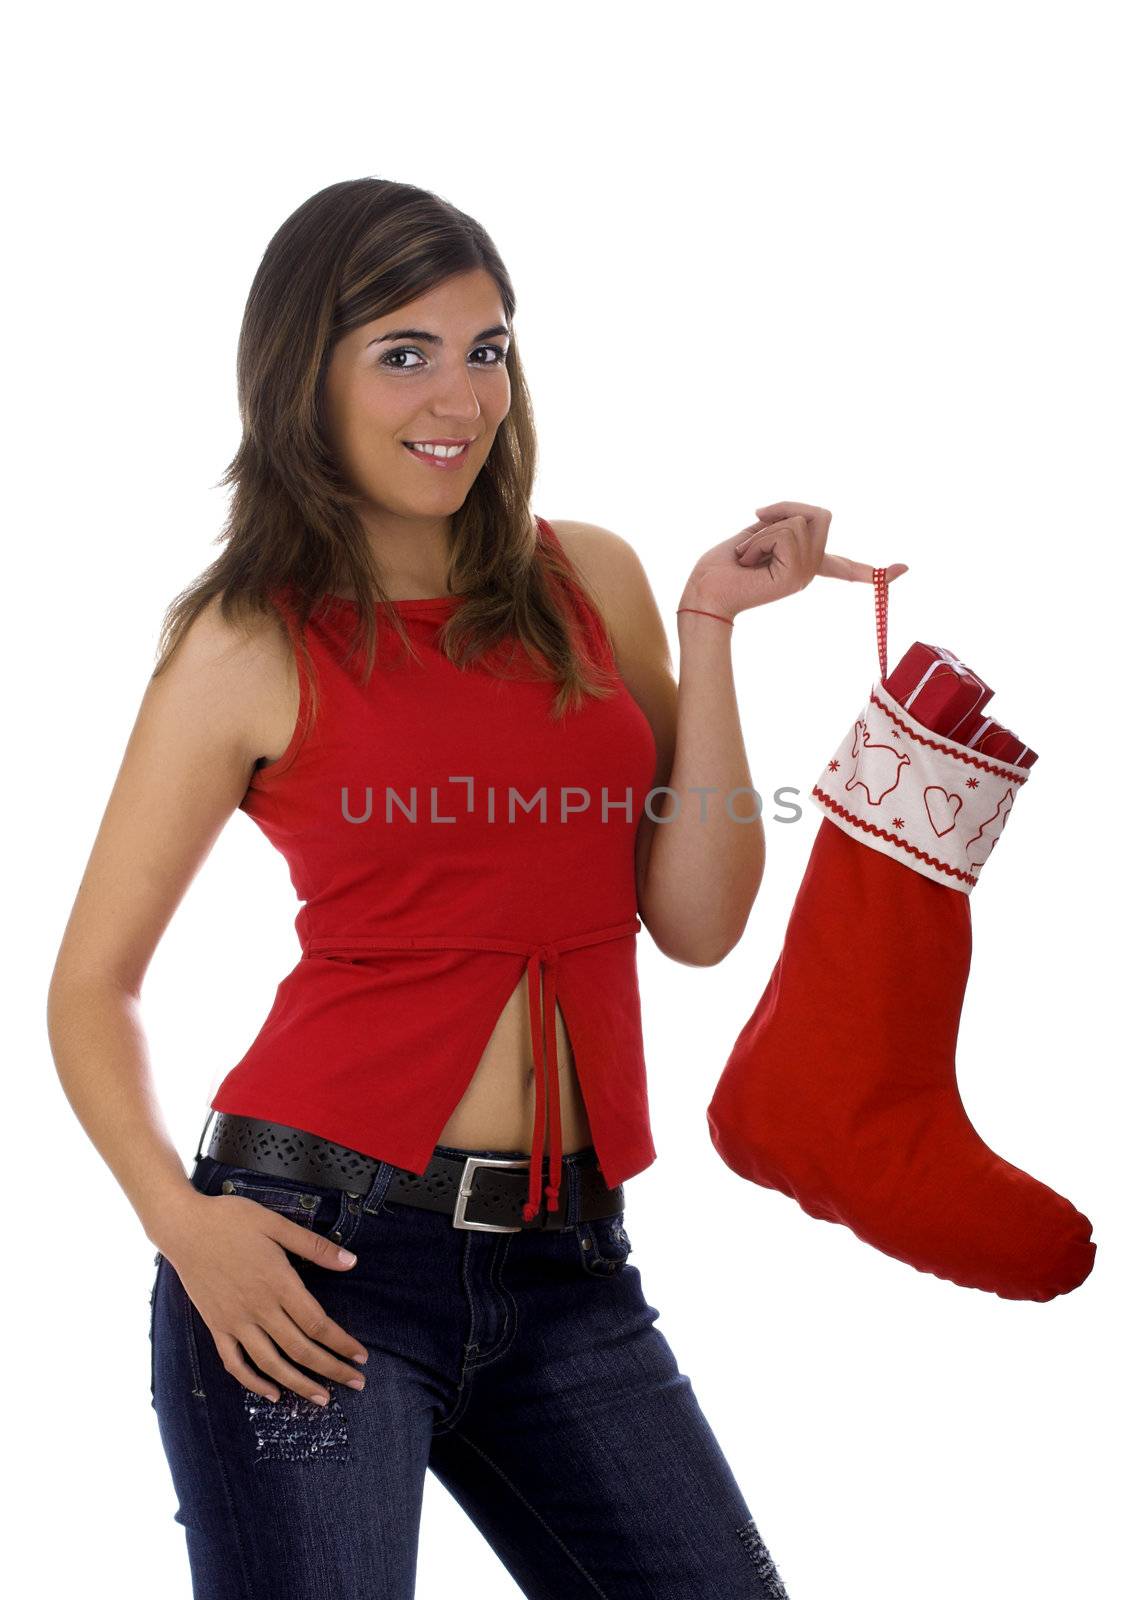 Christmas season! Different poses of a beautiful woman with a Christmas Socks full of small gifts inside.